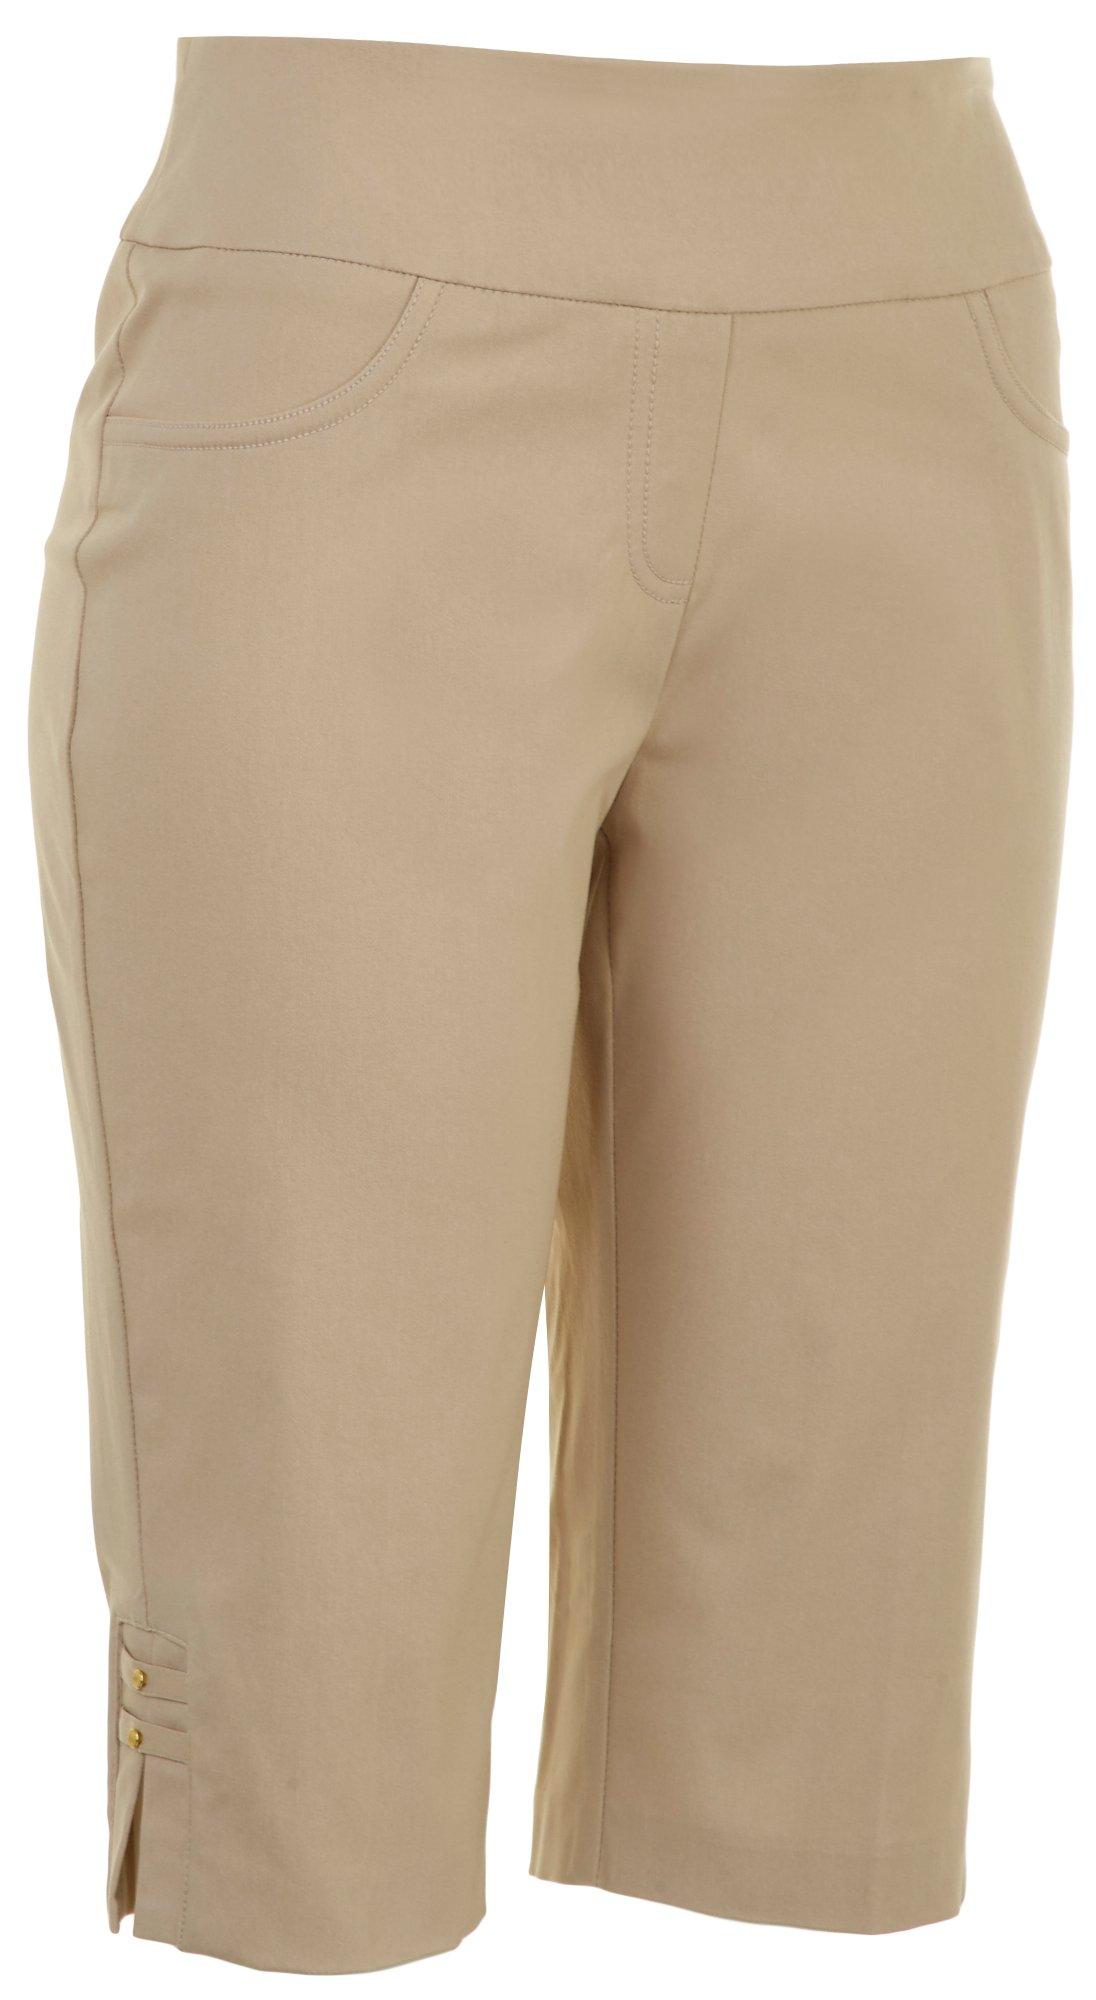 Hearts of Palm Womens Solid Skimmer Shorts